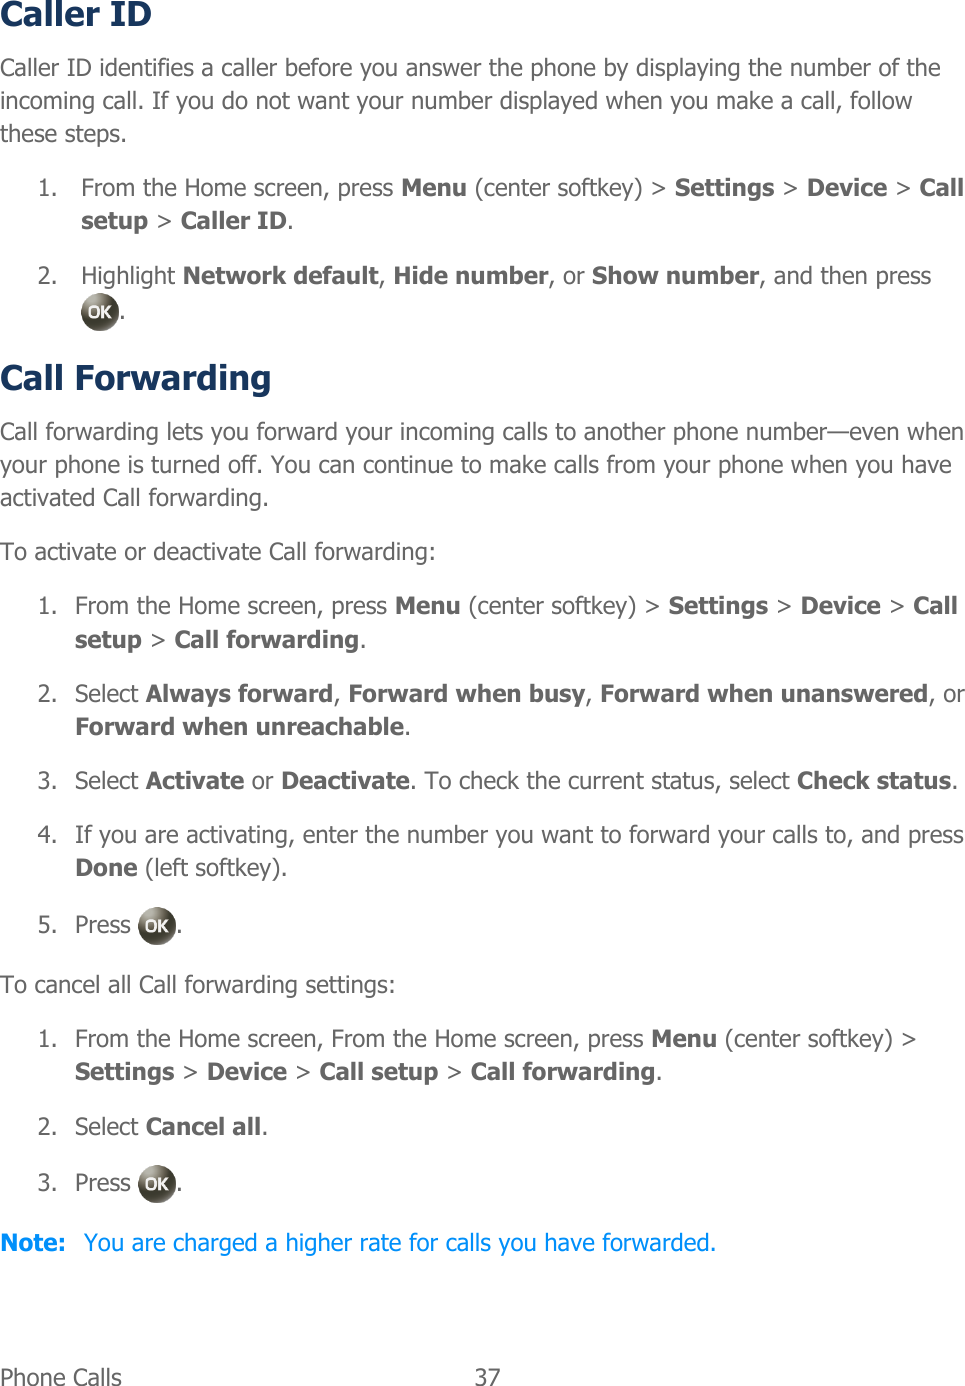  Phone Calls   37   Caller ID Caller ID identifies a caller before you answer the phone by displaying the number of the incoming call. If you do not want your number displayed when you make a call, follow these steps. 1. From the Home screen, press Menu (center softkey) &gt; Settings &gt; Device &gt; Call setup &gt; Caller ID. 2. Highlight Network default, Hide number, or Show number, and then press  . Call Forwarding Call forwarding lets you forward your incoming calls to another phone number—even when your phone is turned off. You can continue to make calls from your phone when you have activated Call forwarding. To activate or deactivate Call forwarding: 1. From the Home screen, press Menu (center softkey) &gt; Settings &gt; Device &gt; Call setup &gt; Call forwarding. 2. Select Always forward, Forward when busy, Forward when unanswered, or Forward when unreachable. 3. Select Activate or Deactivate. To check the current status, select Check status. 4. If you are activating, enter the number you want to forward your calls to, and press Done (left softkey). 5. Press  . To cancel all Call forwarding settings: 1. From the Home screen, From the Home screen, press Menu (center softkey) &gt; Settings &gt; Device &gt; Call setup &gt; Call forwarding. 2. Select Cancel all. 3. Press  . Note:  You are charged a higher rate for calls you have forwarded.  